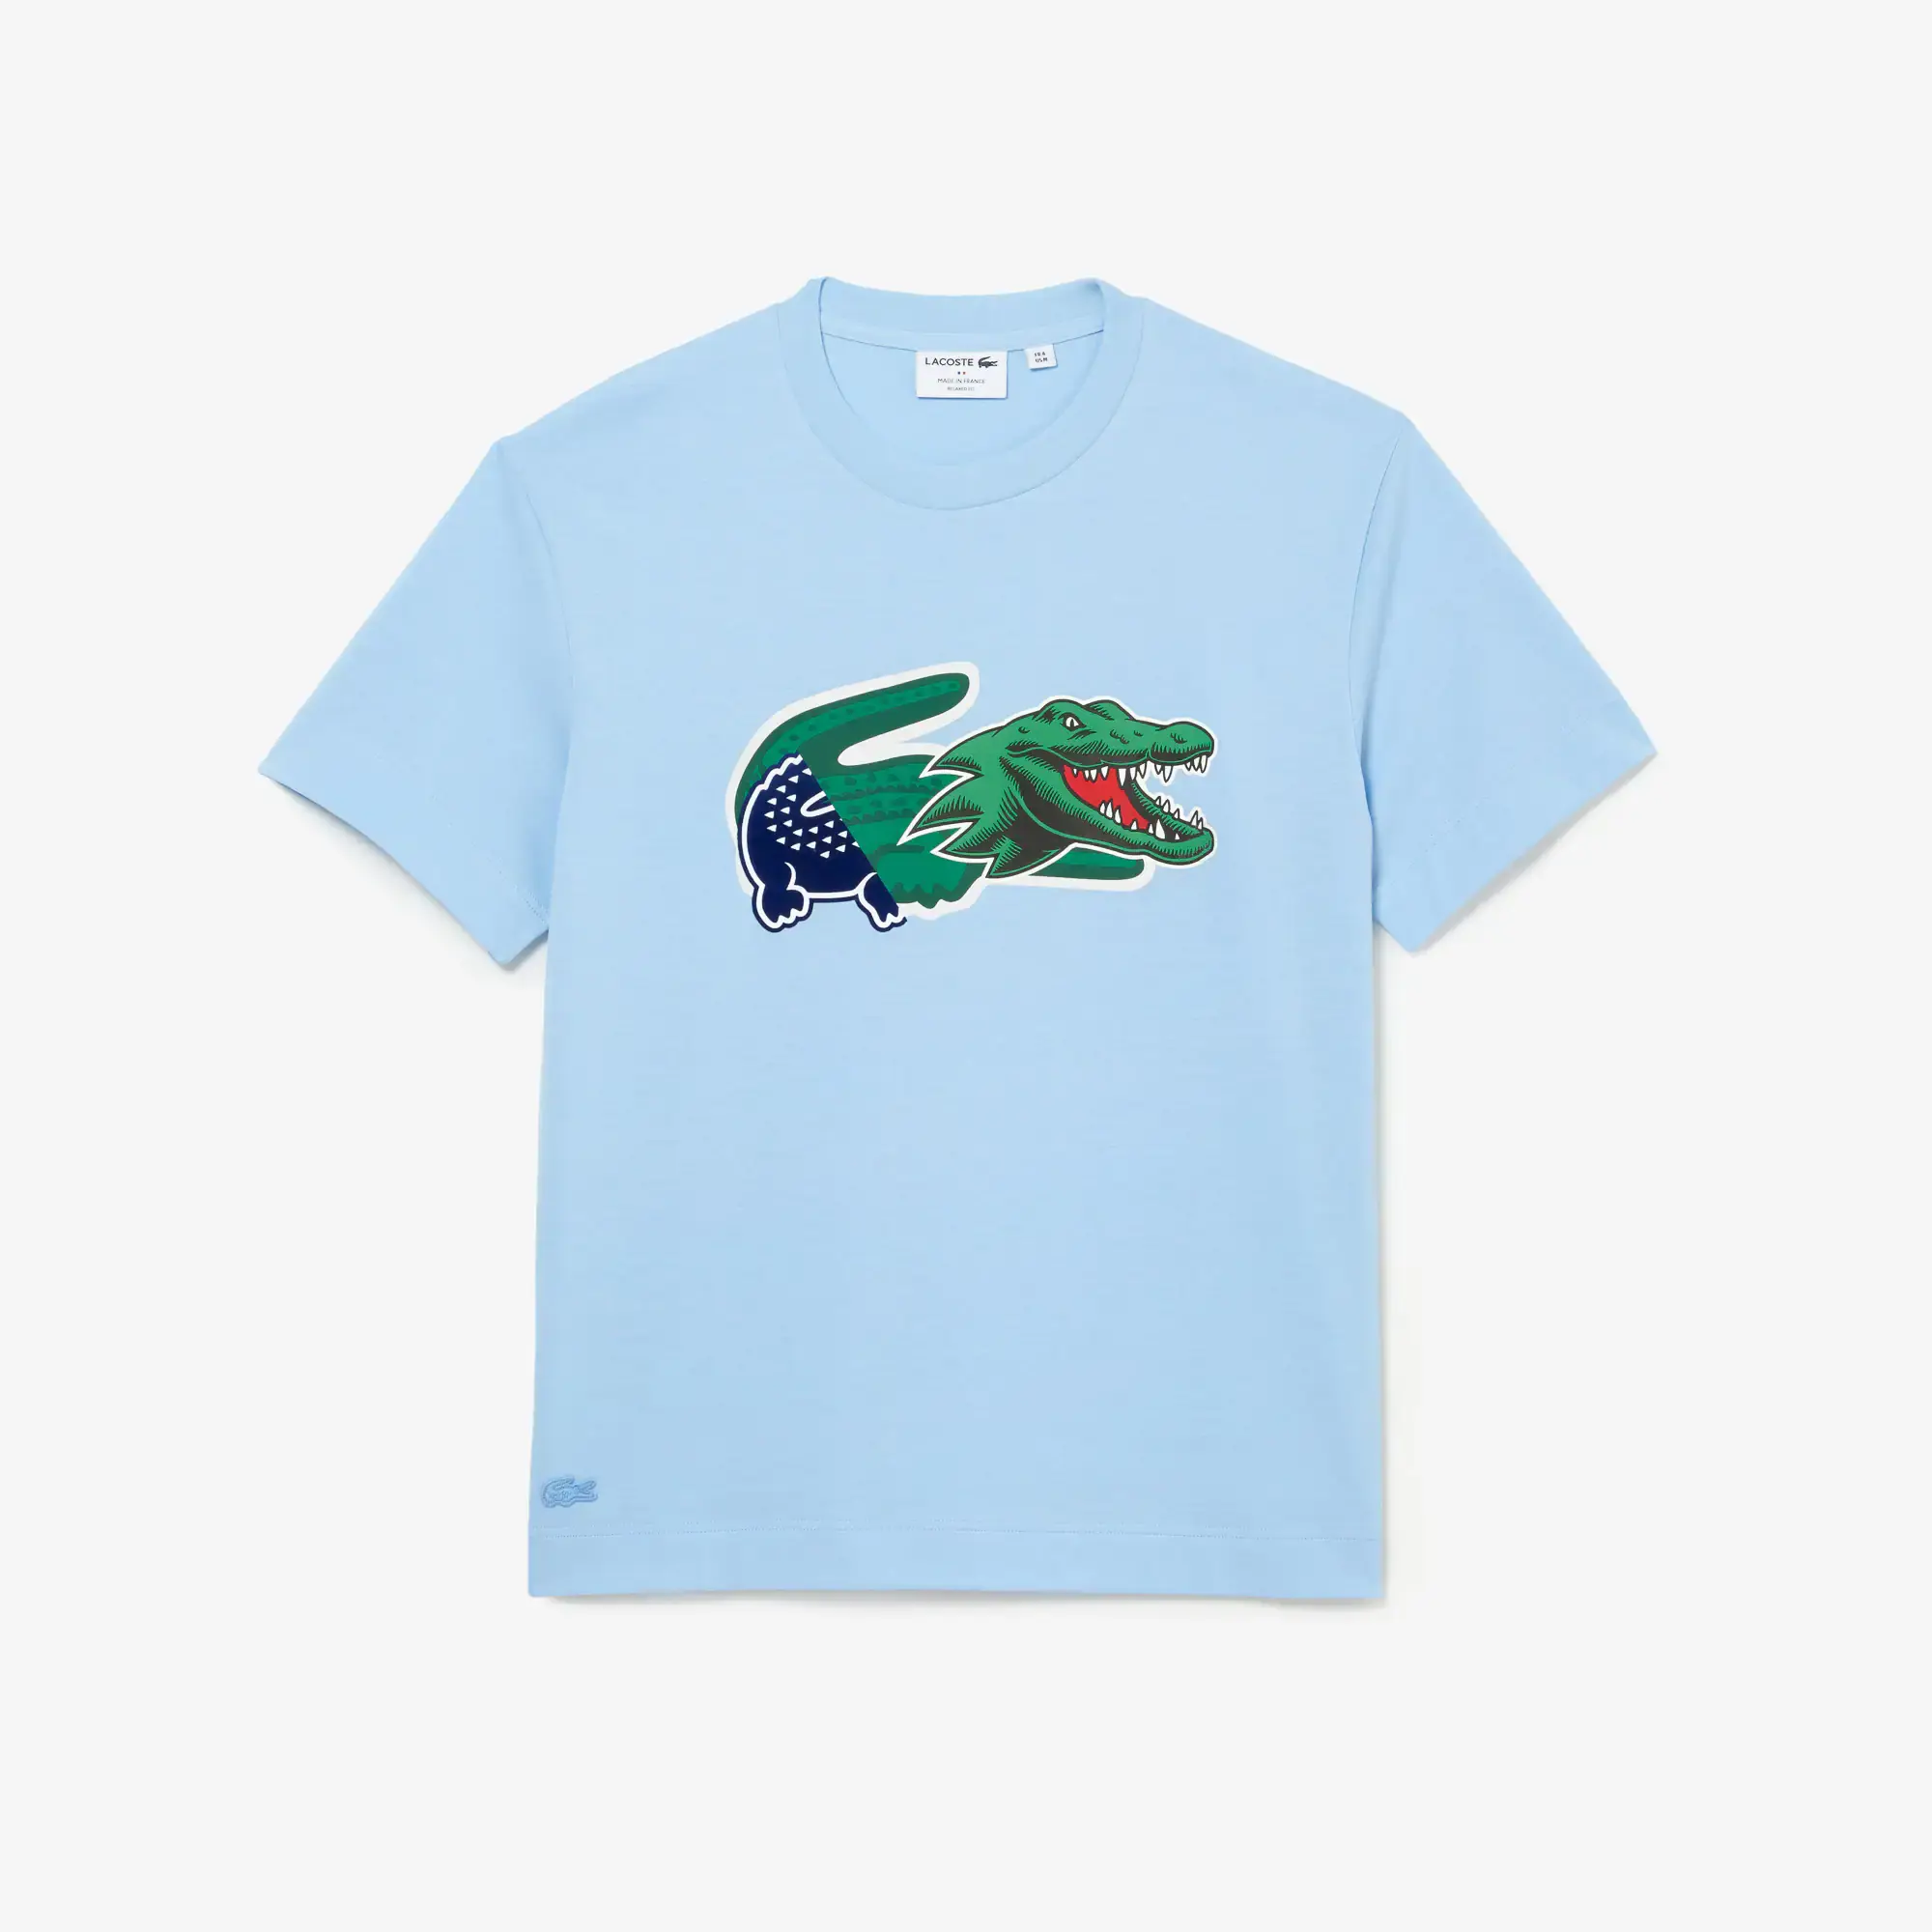 Lacoste Men's Relaxed Fit Oversized Crocodile T-Shirt. 2